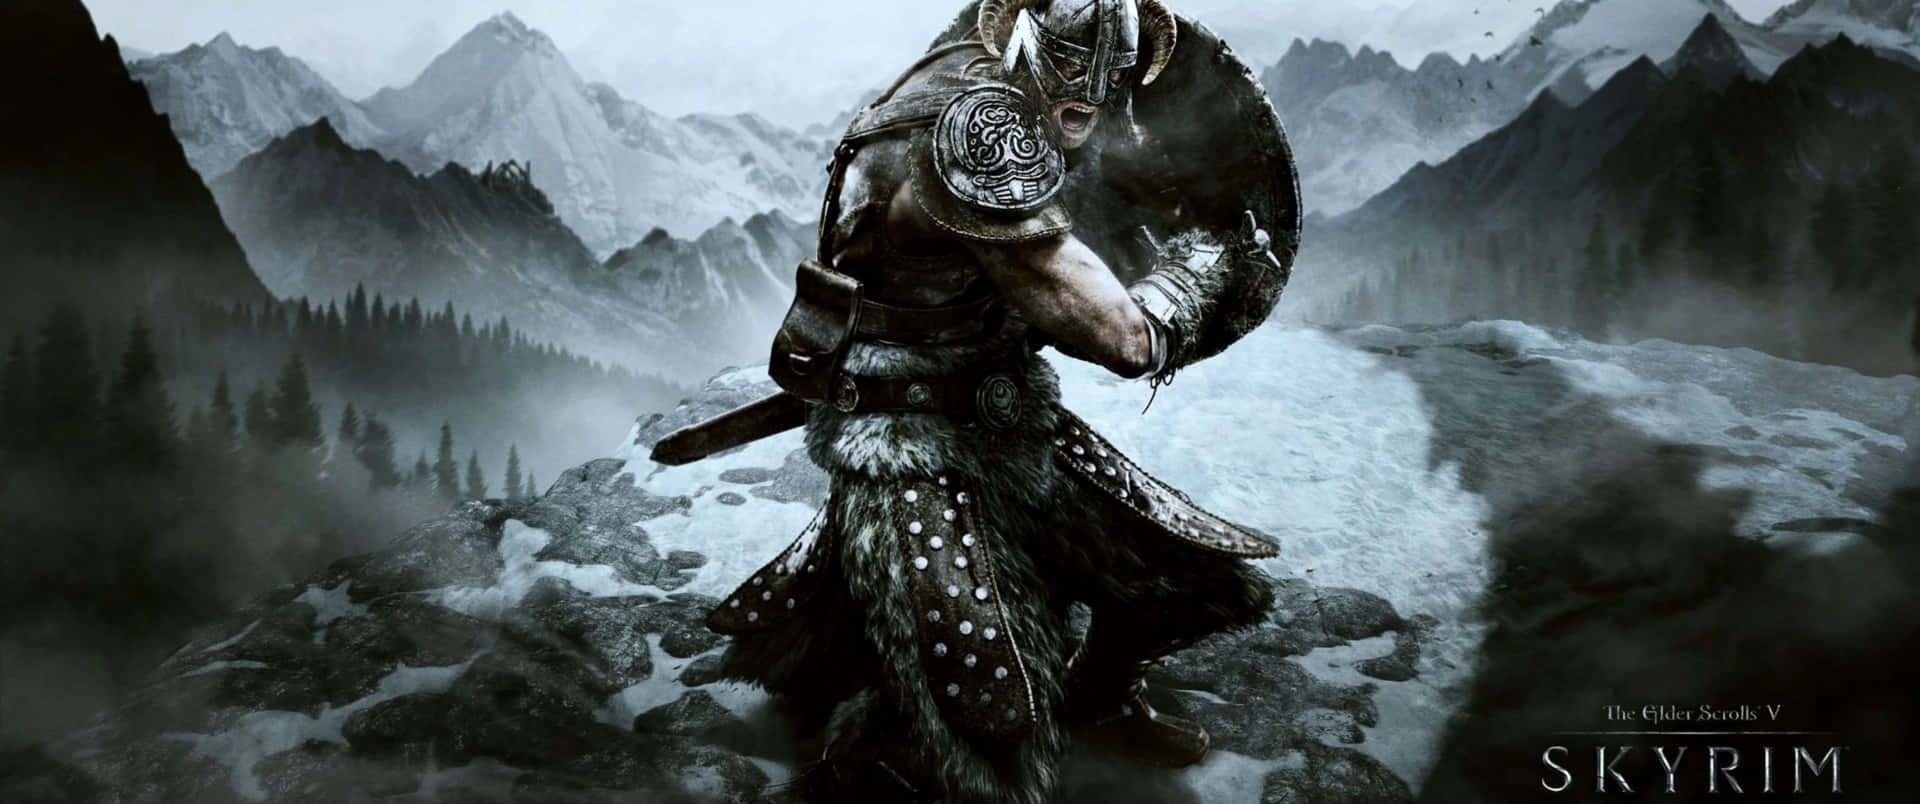 Picture  Go on an epic adventure in The Elder Scrolls V: Skyrim!